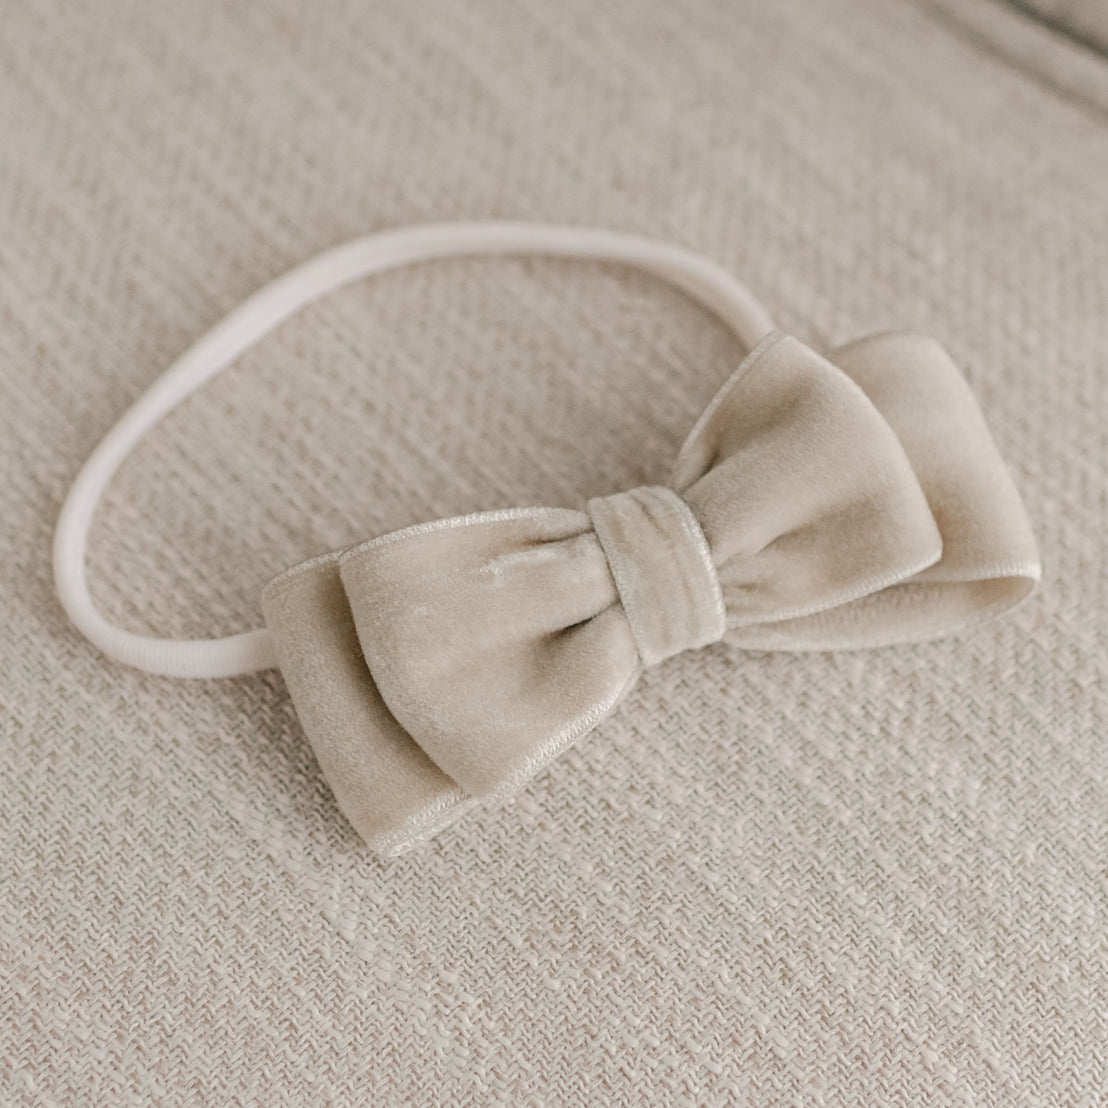 A beige Kristina Velvet Bow Headband attached to a matching elastic band, resting on a textured light grey fabric background, ideal for baptism or christening celebrations.